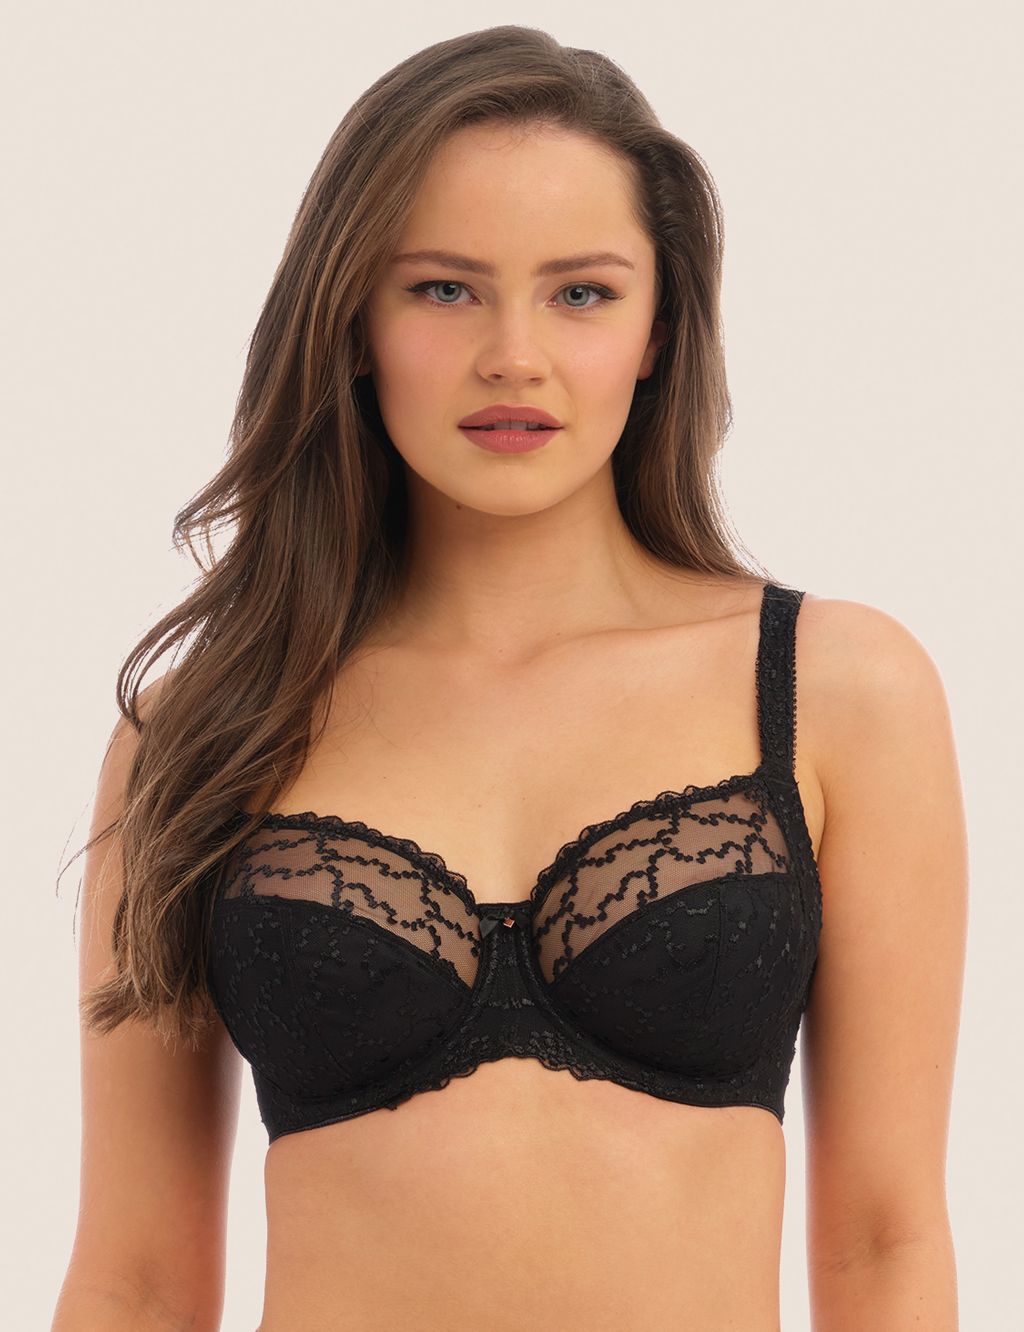 Ana Wired Side Support Bra D-J image 1